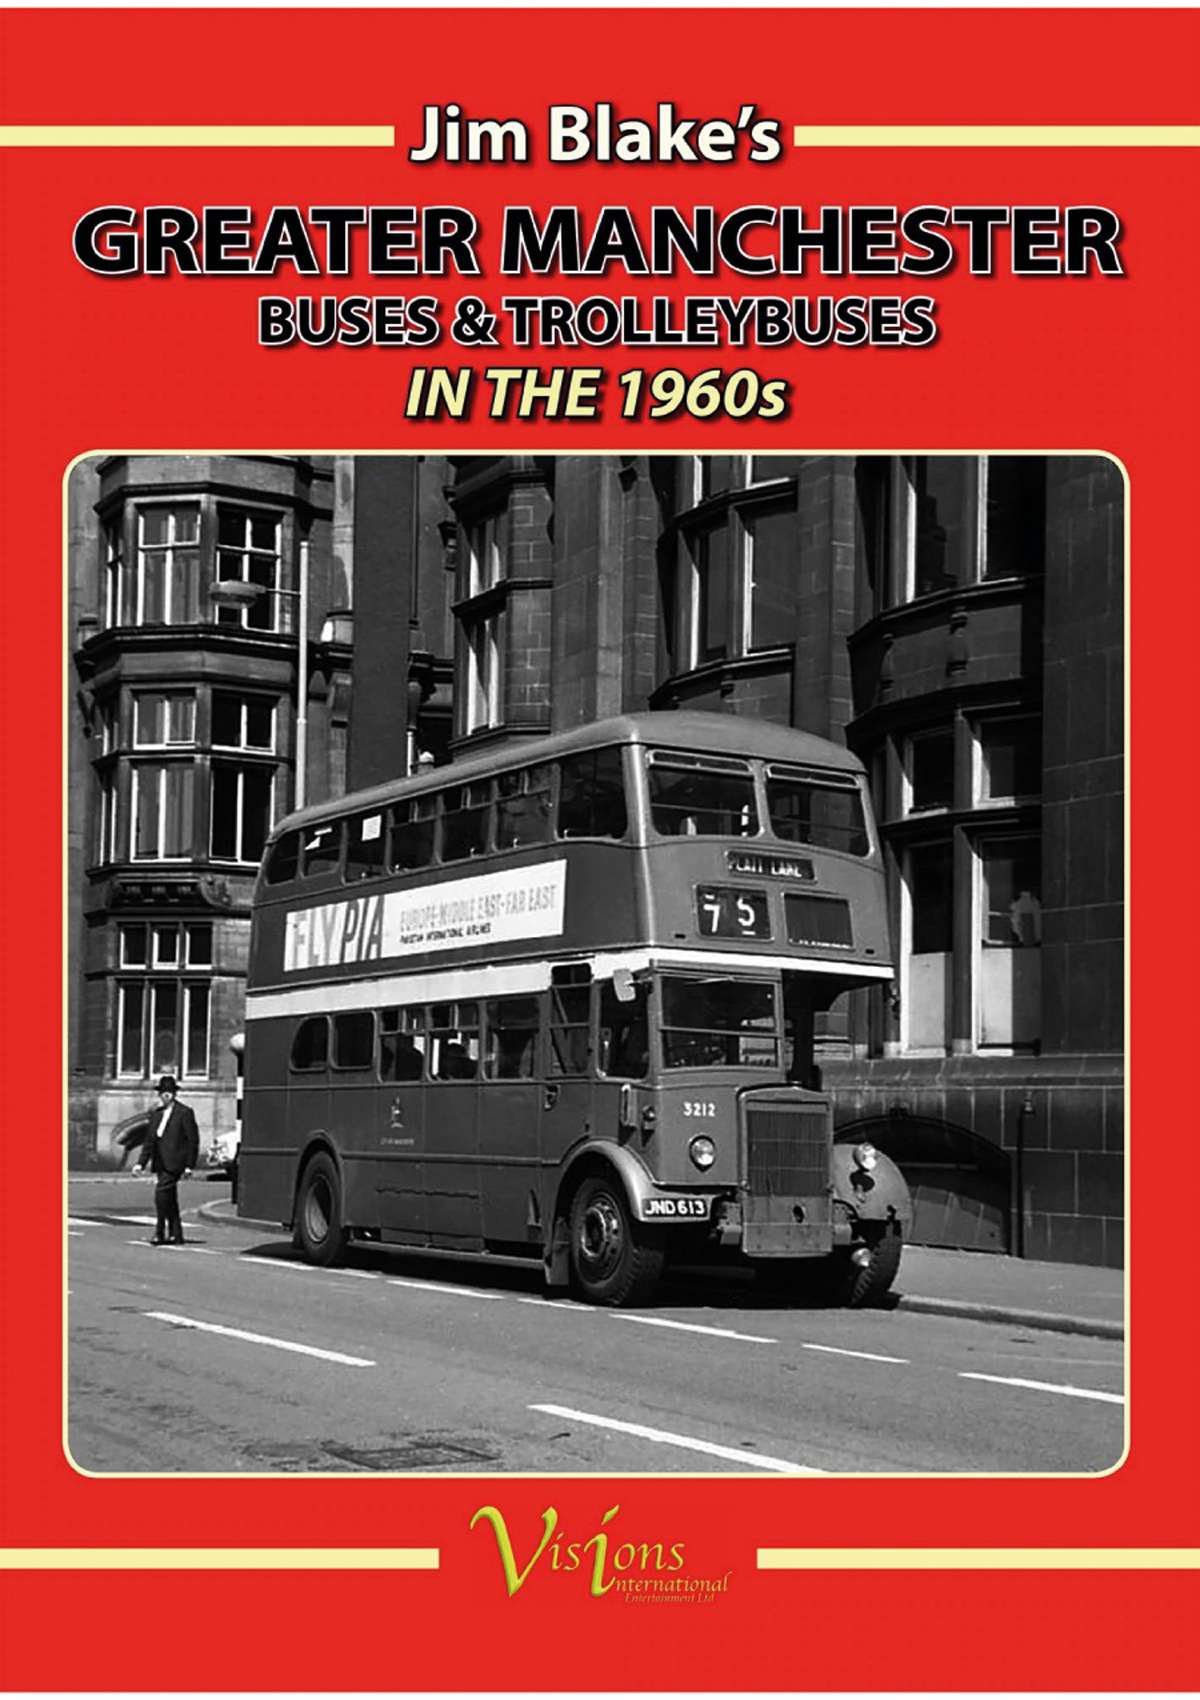 Jim Blake's Greater Manchester Buses & Trolleybuses In The 1960s